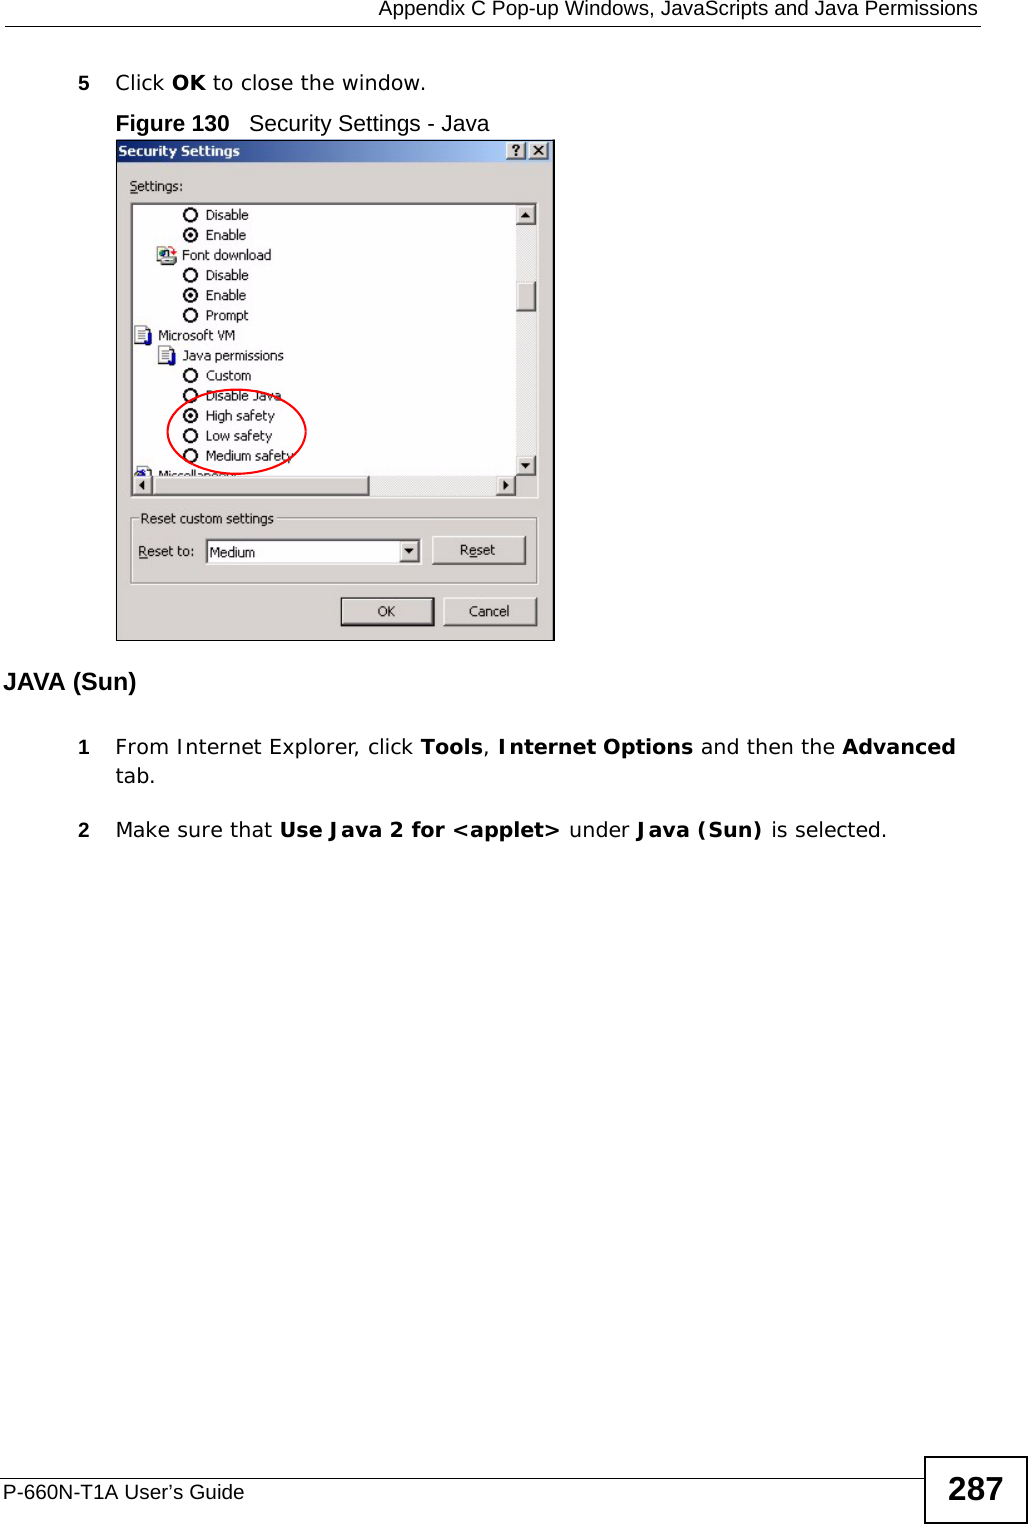  Appendix C Pop-up Windows, JavaScripts and Java PermissionsP-660N-T1A User’s Guide 2875Click OK to close the window.Figure 130   Security Settings - Java JAVA (Sun)1From Internet Explorer, click Tools, Internet Options and then the Advanced tab. 2Make sure that Use Java 2 for &lt;applet&gt; under Java (Sun) is selected.